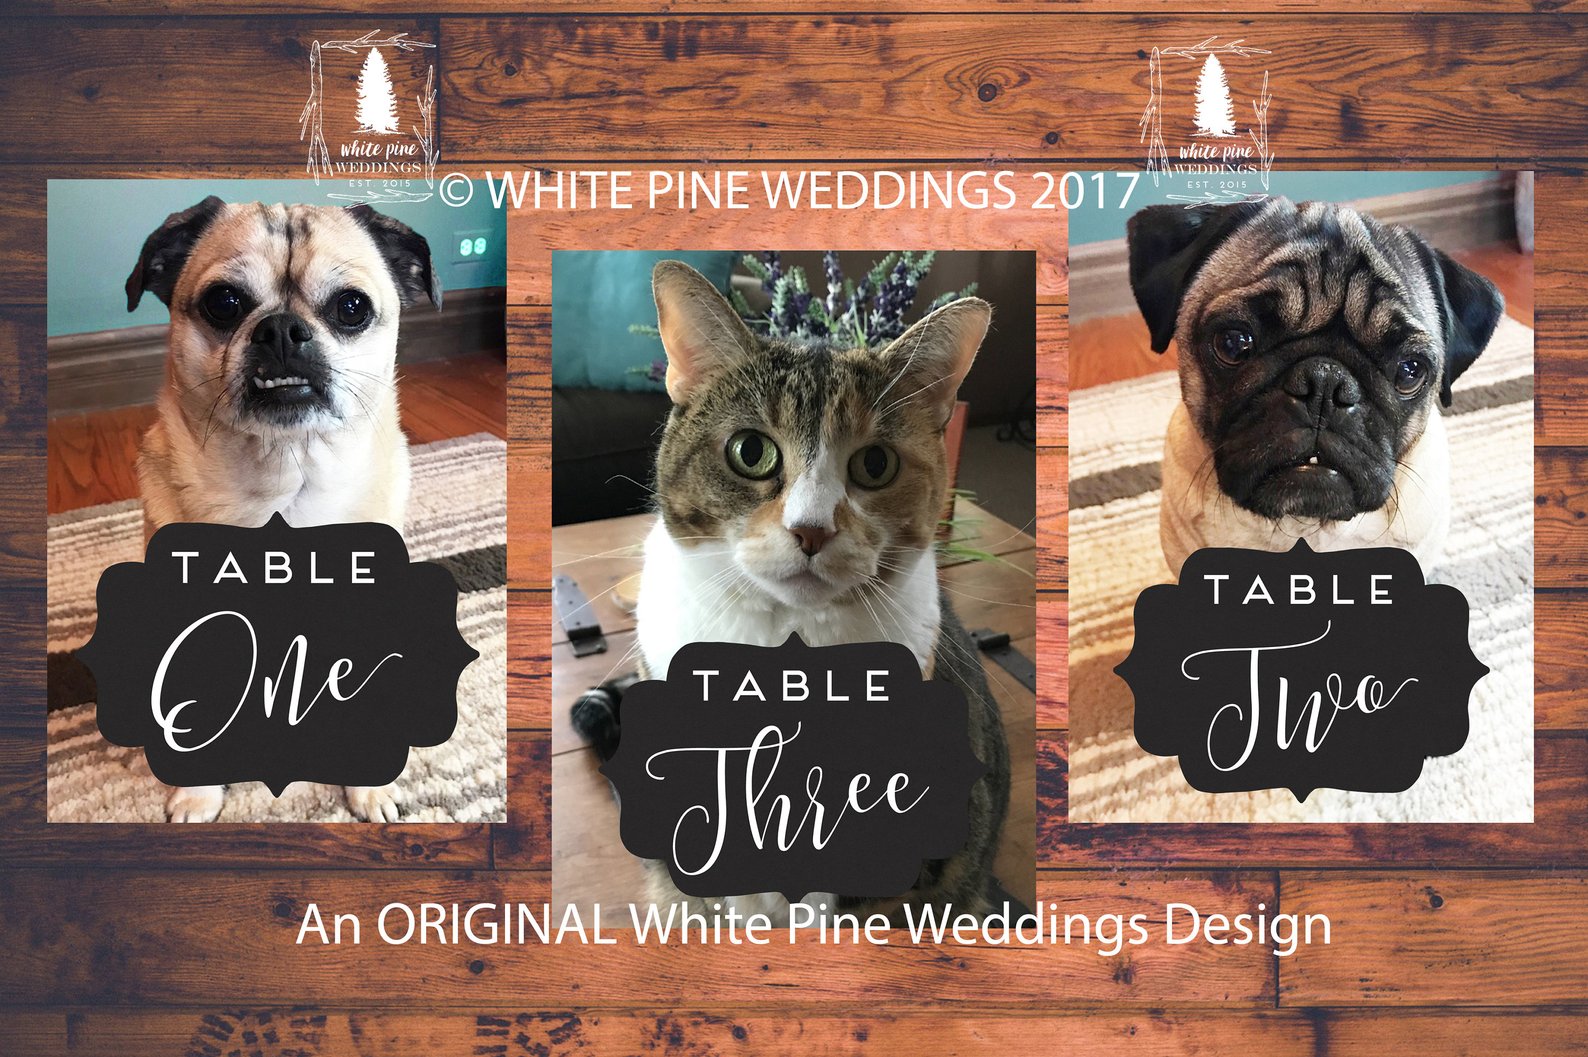   White Pine Weddings  on Etsy makes adorable pet table numbers for weddings!! 